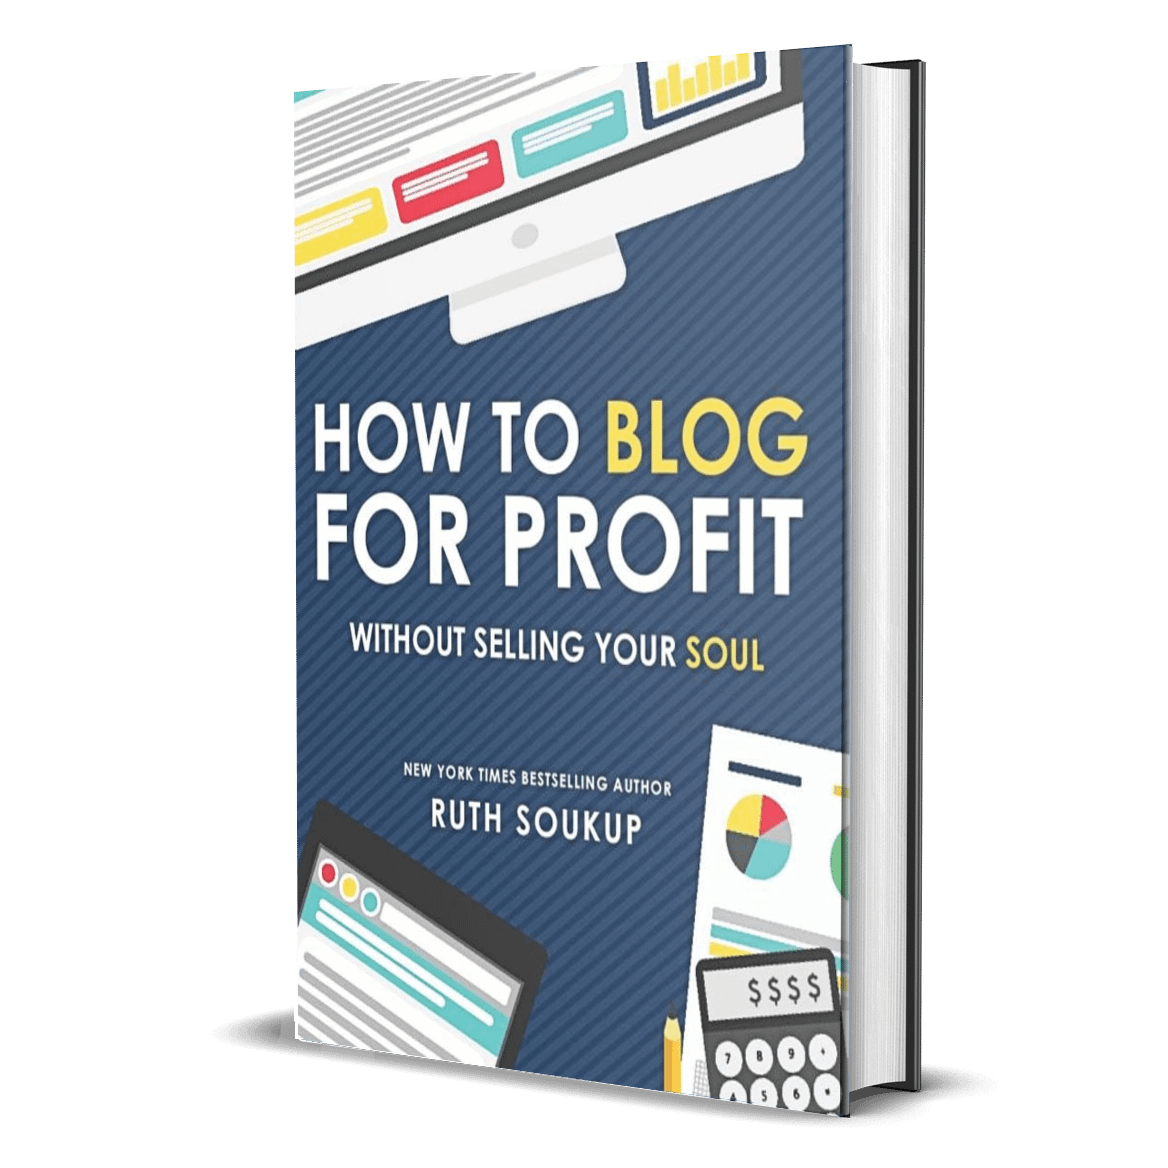 How to Blog for Profit by Ruth Soukup is a comprehensive book that will teach you how to monetize your blog.